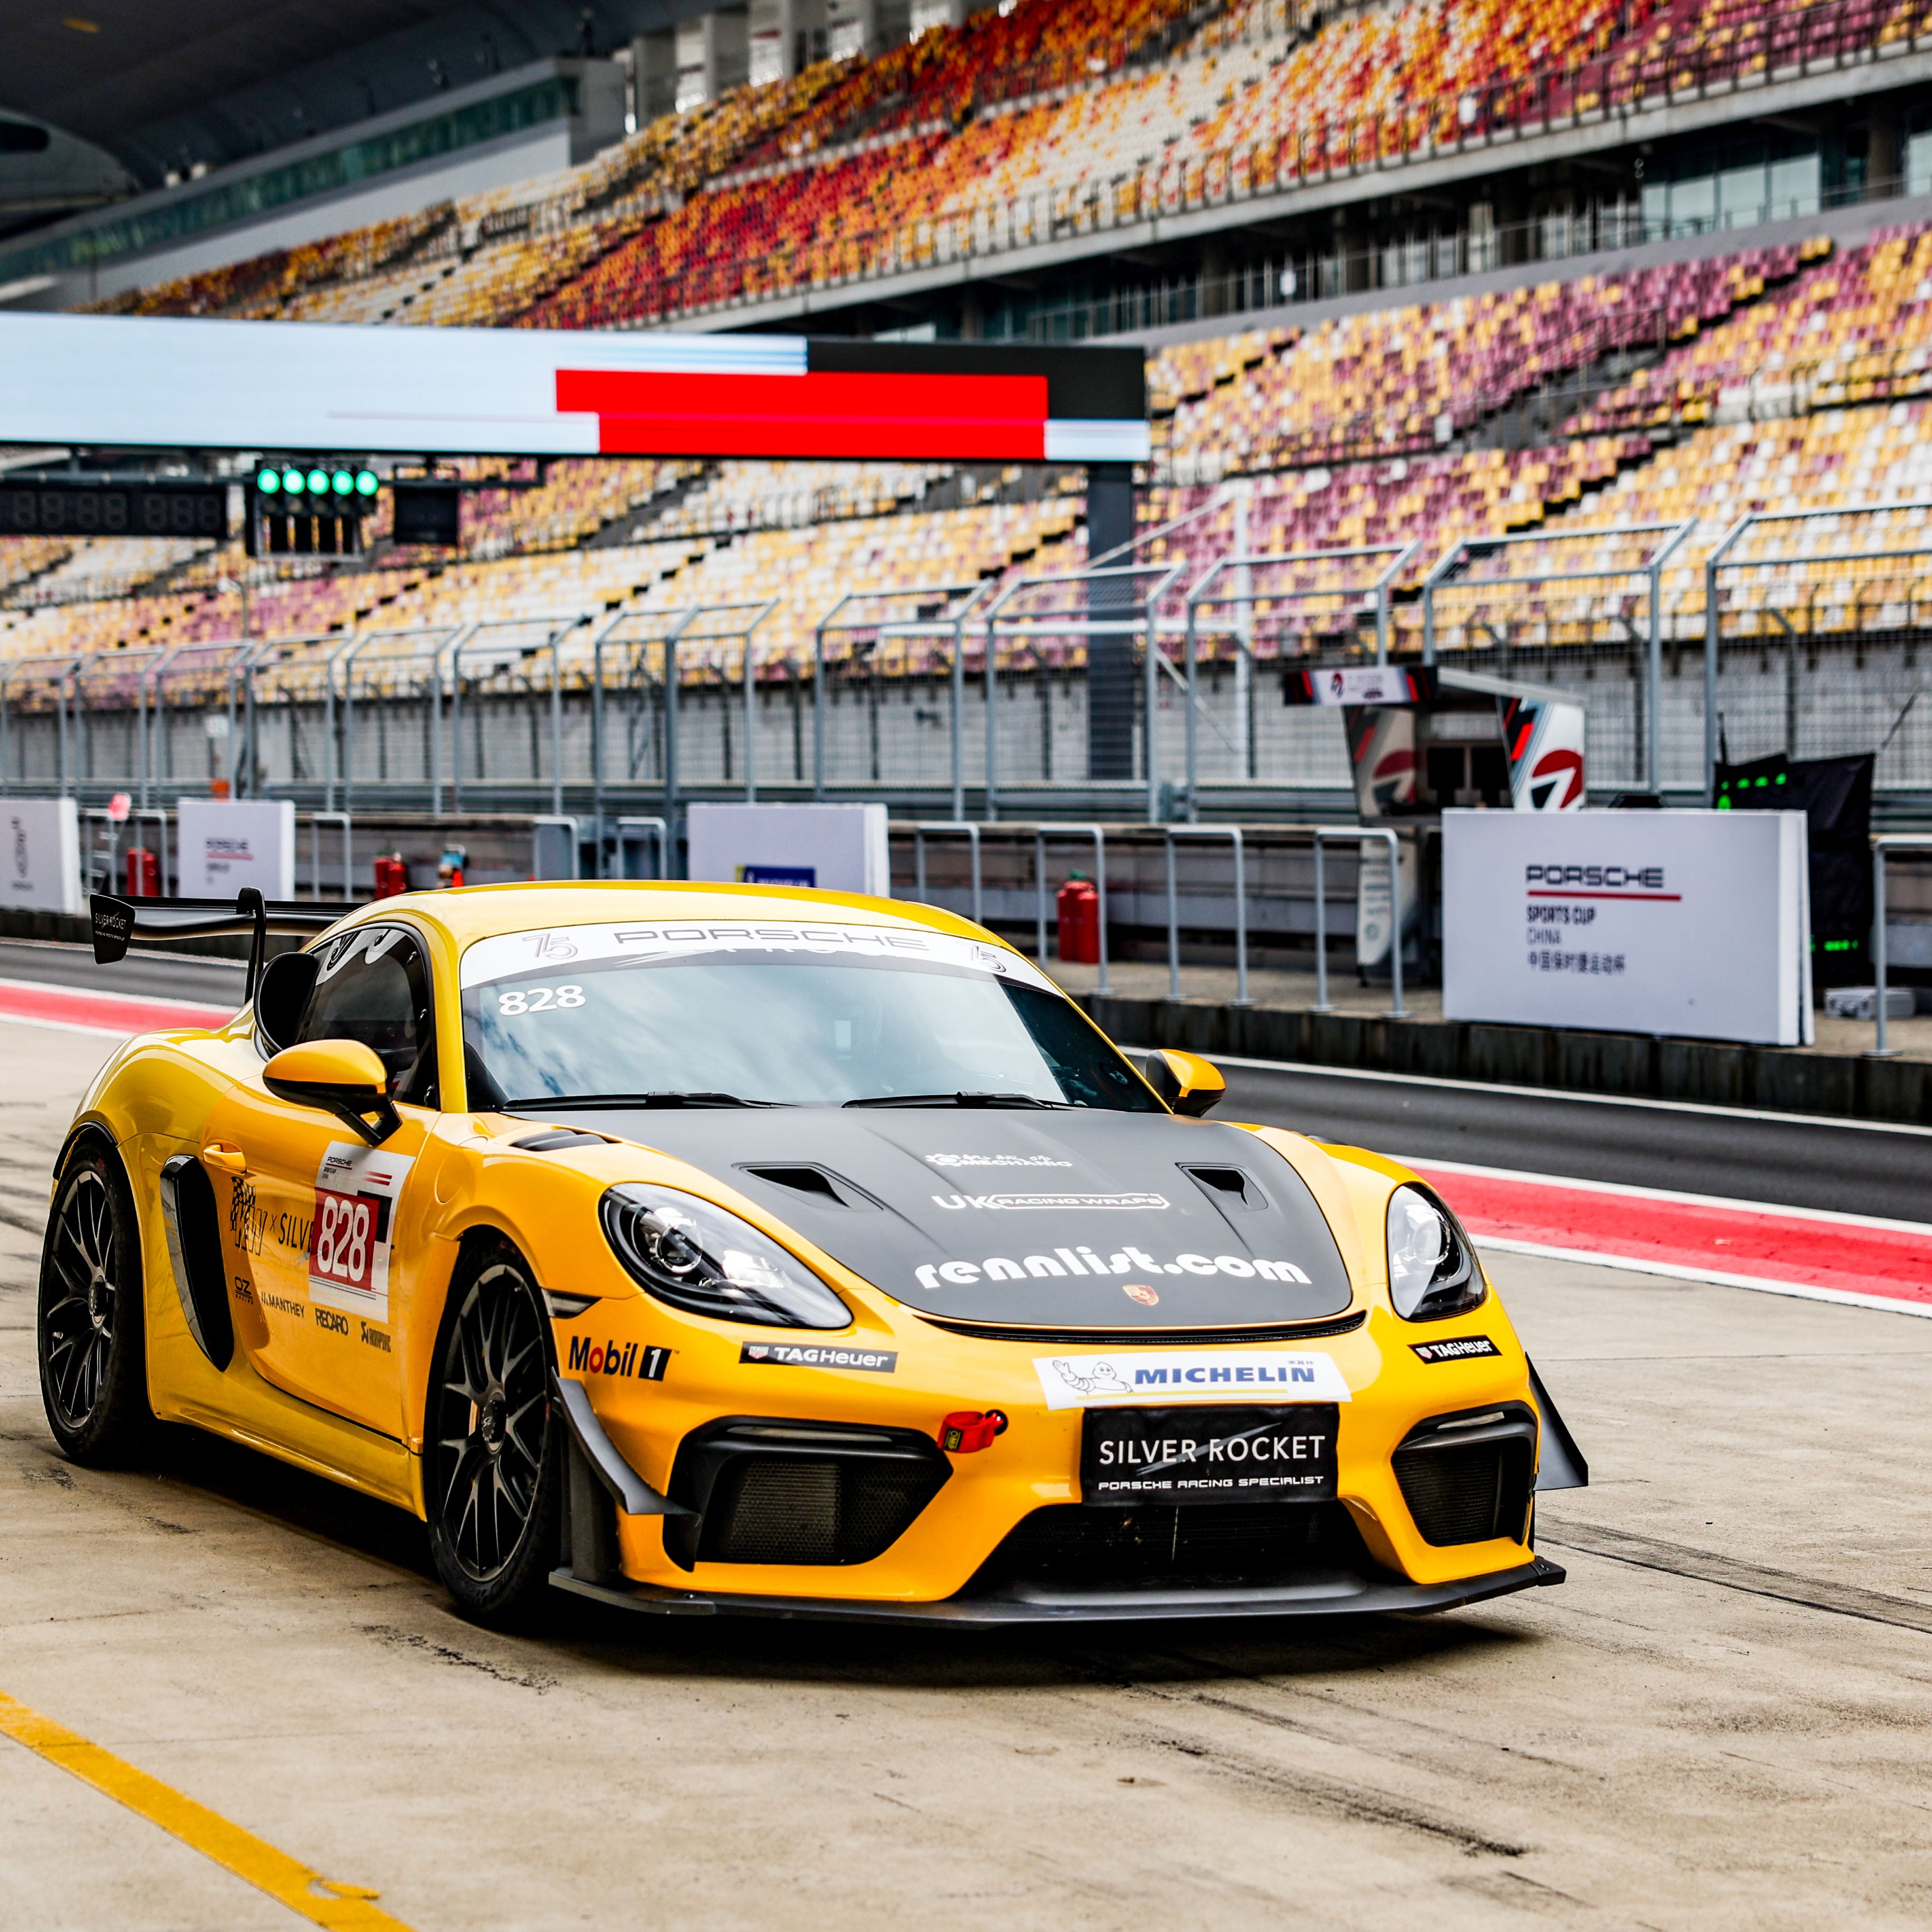 NEW RECORD! Fastest Porsche GT4 Lap Time Record Achieved - SilverRocket GT4 RS at Shanghai International Circuit